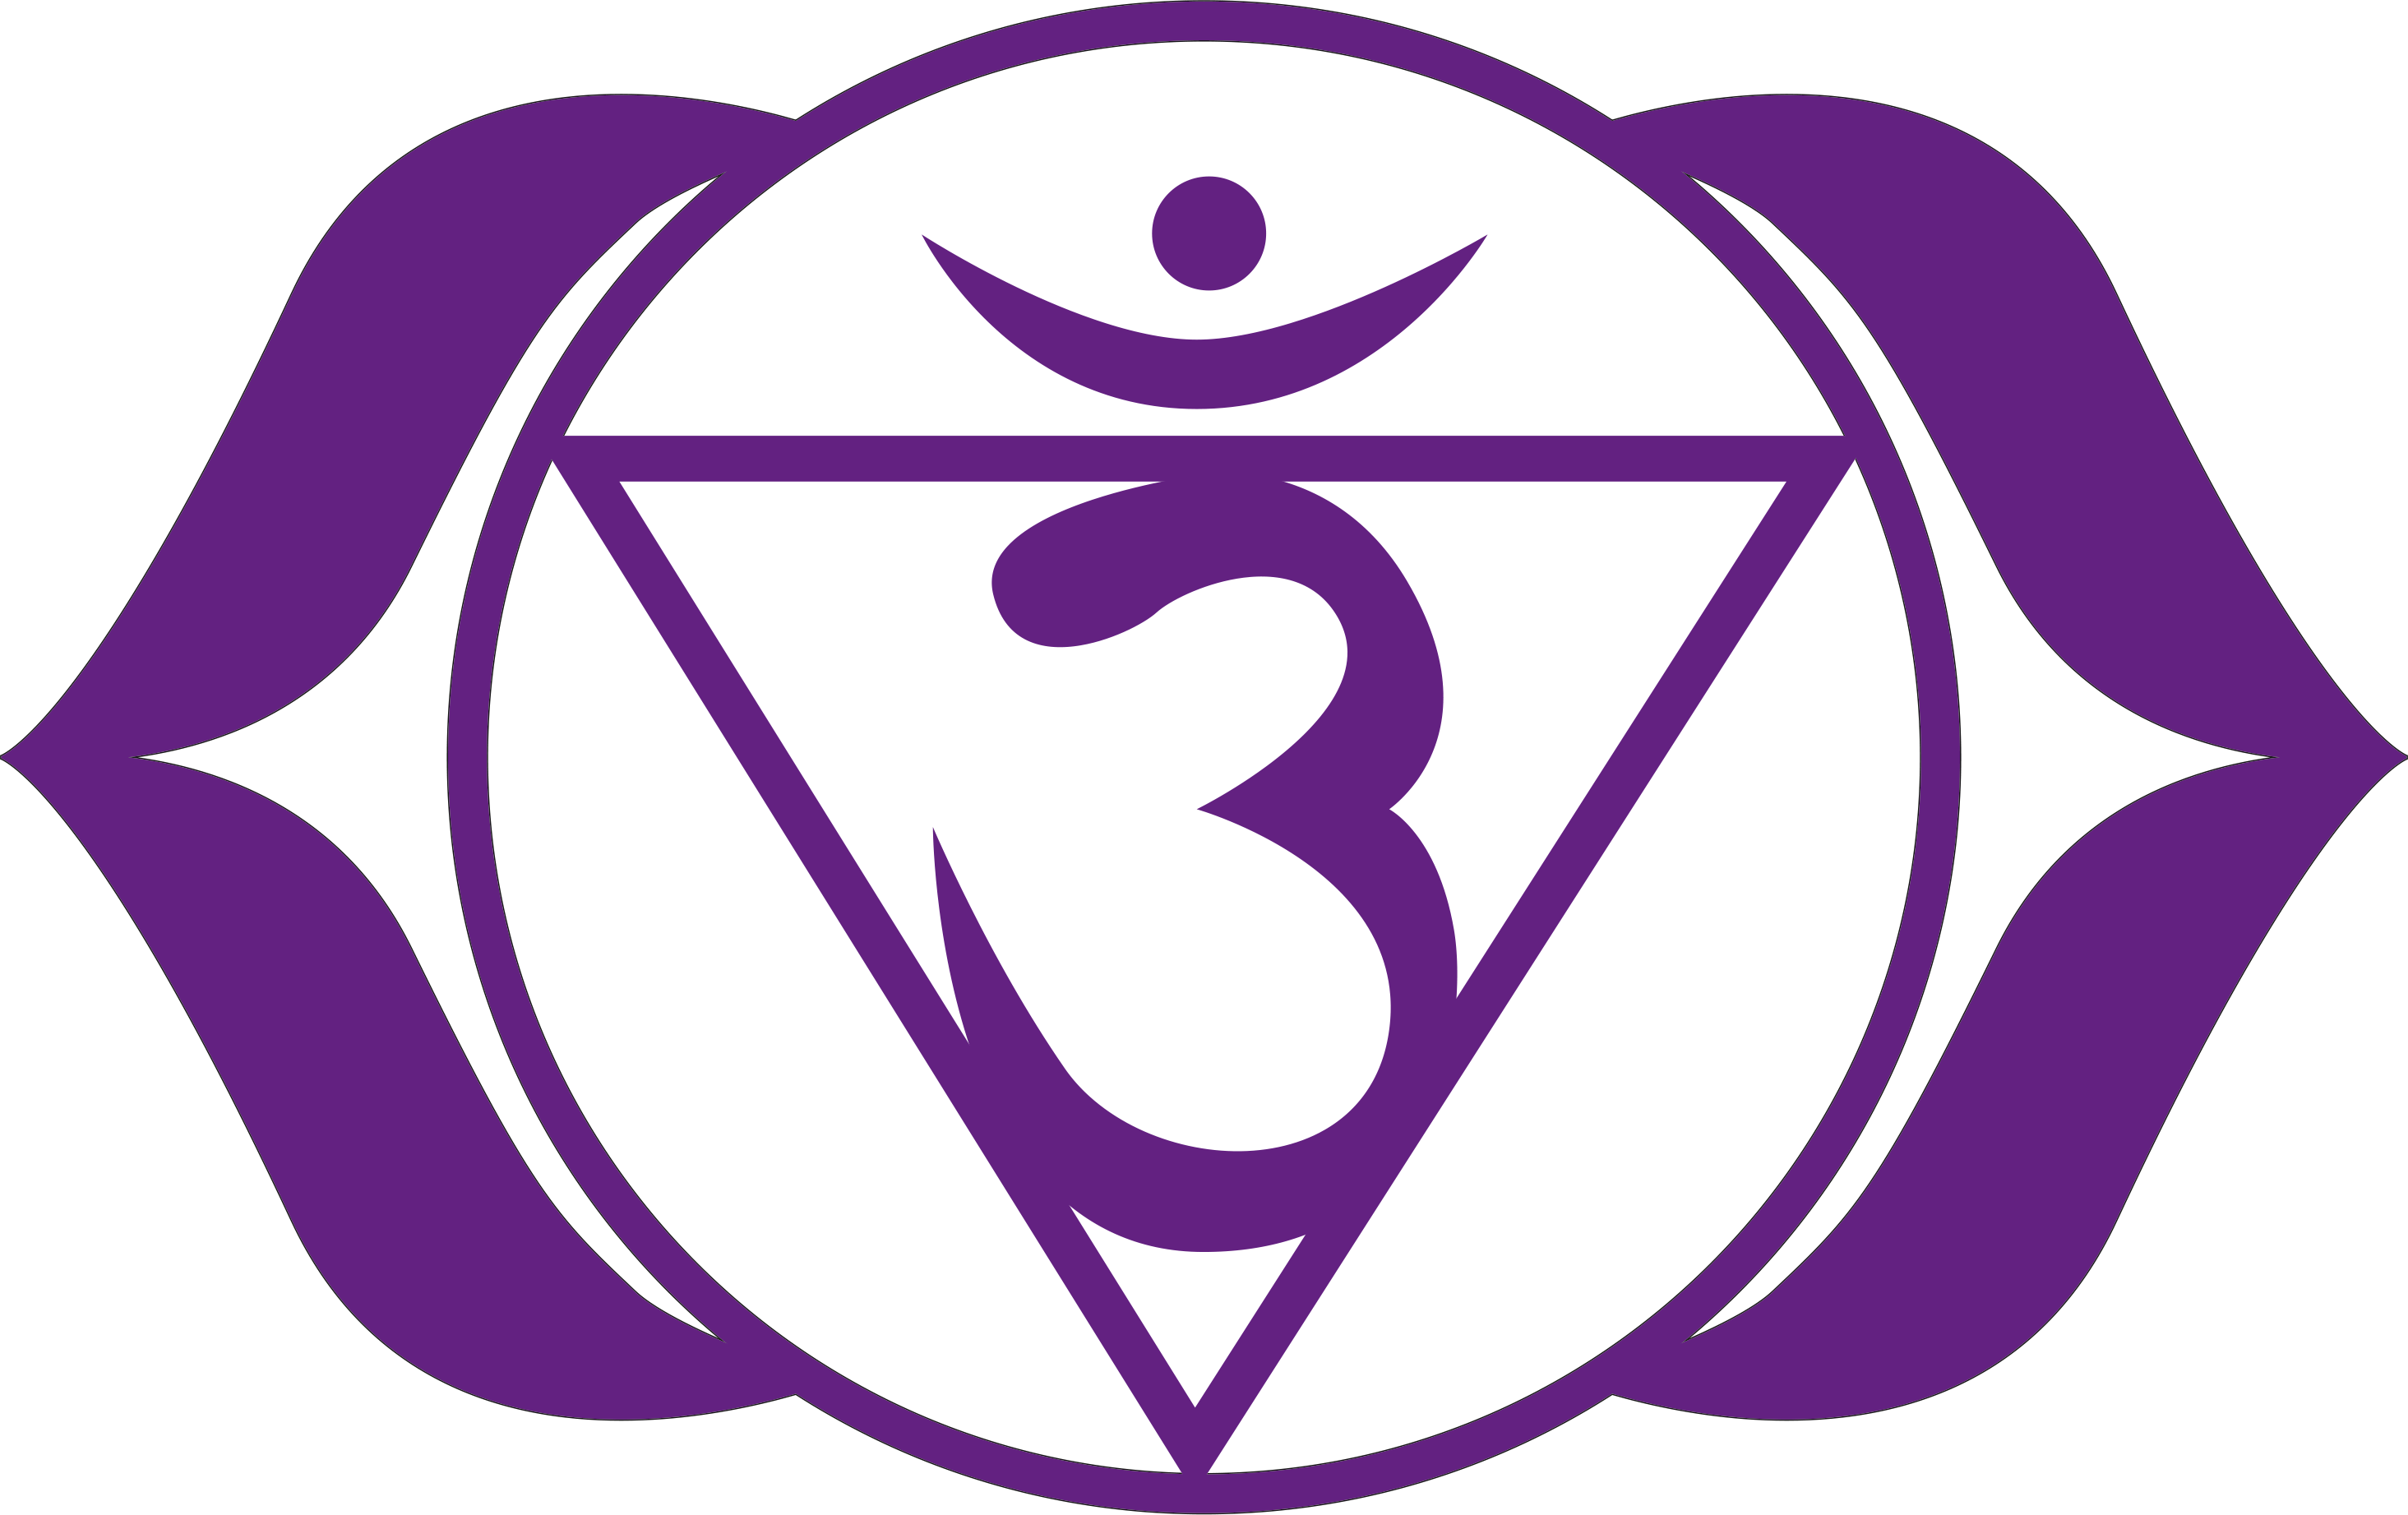 Third Eye Chakra - Intuition & Expanded Awareness